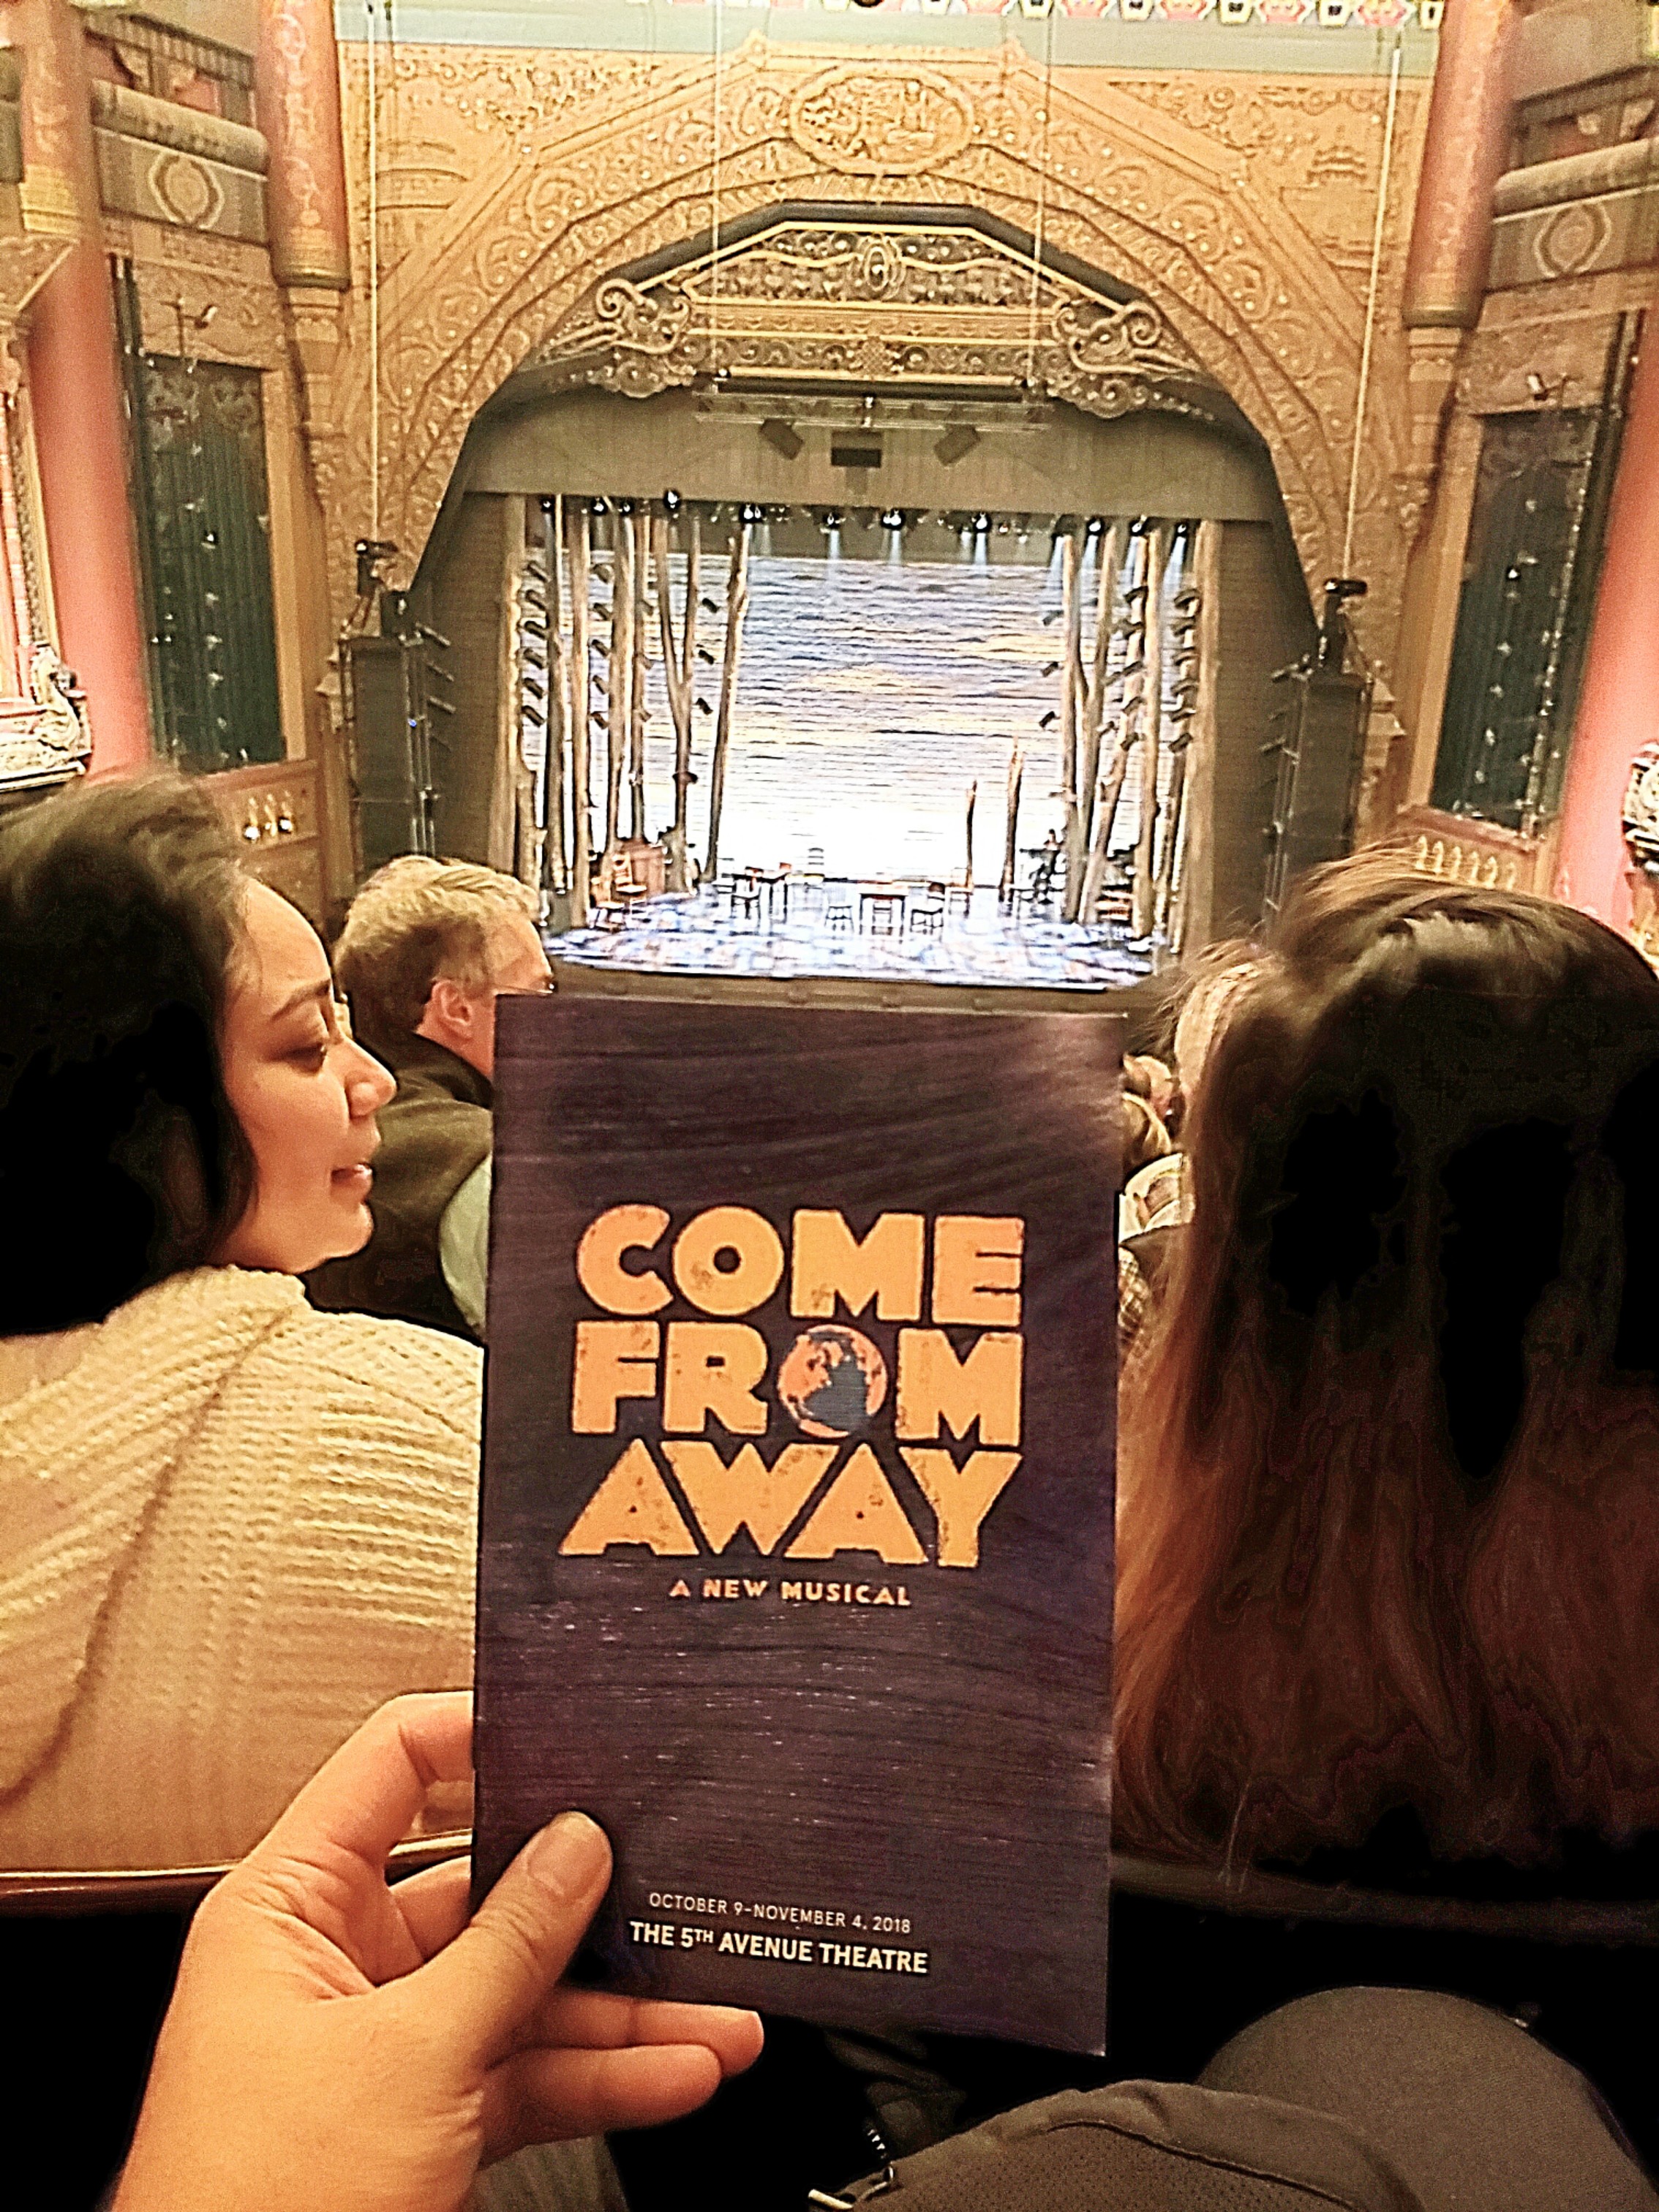 Watched the Tony Awards-winning musical Come From Away. It's a beautiful story that celebrates humanity's spirit of generosity and kindness after 9/11 in a Love Actually way.